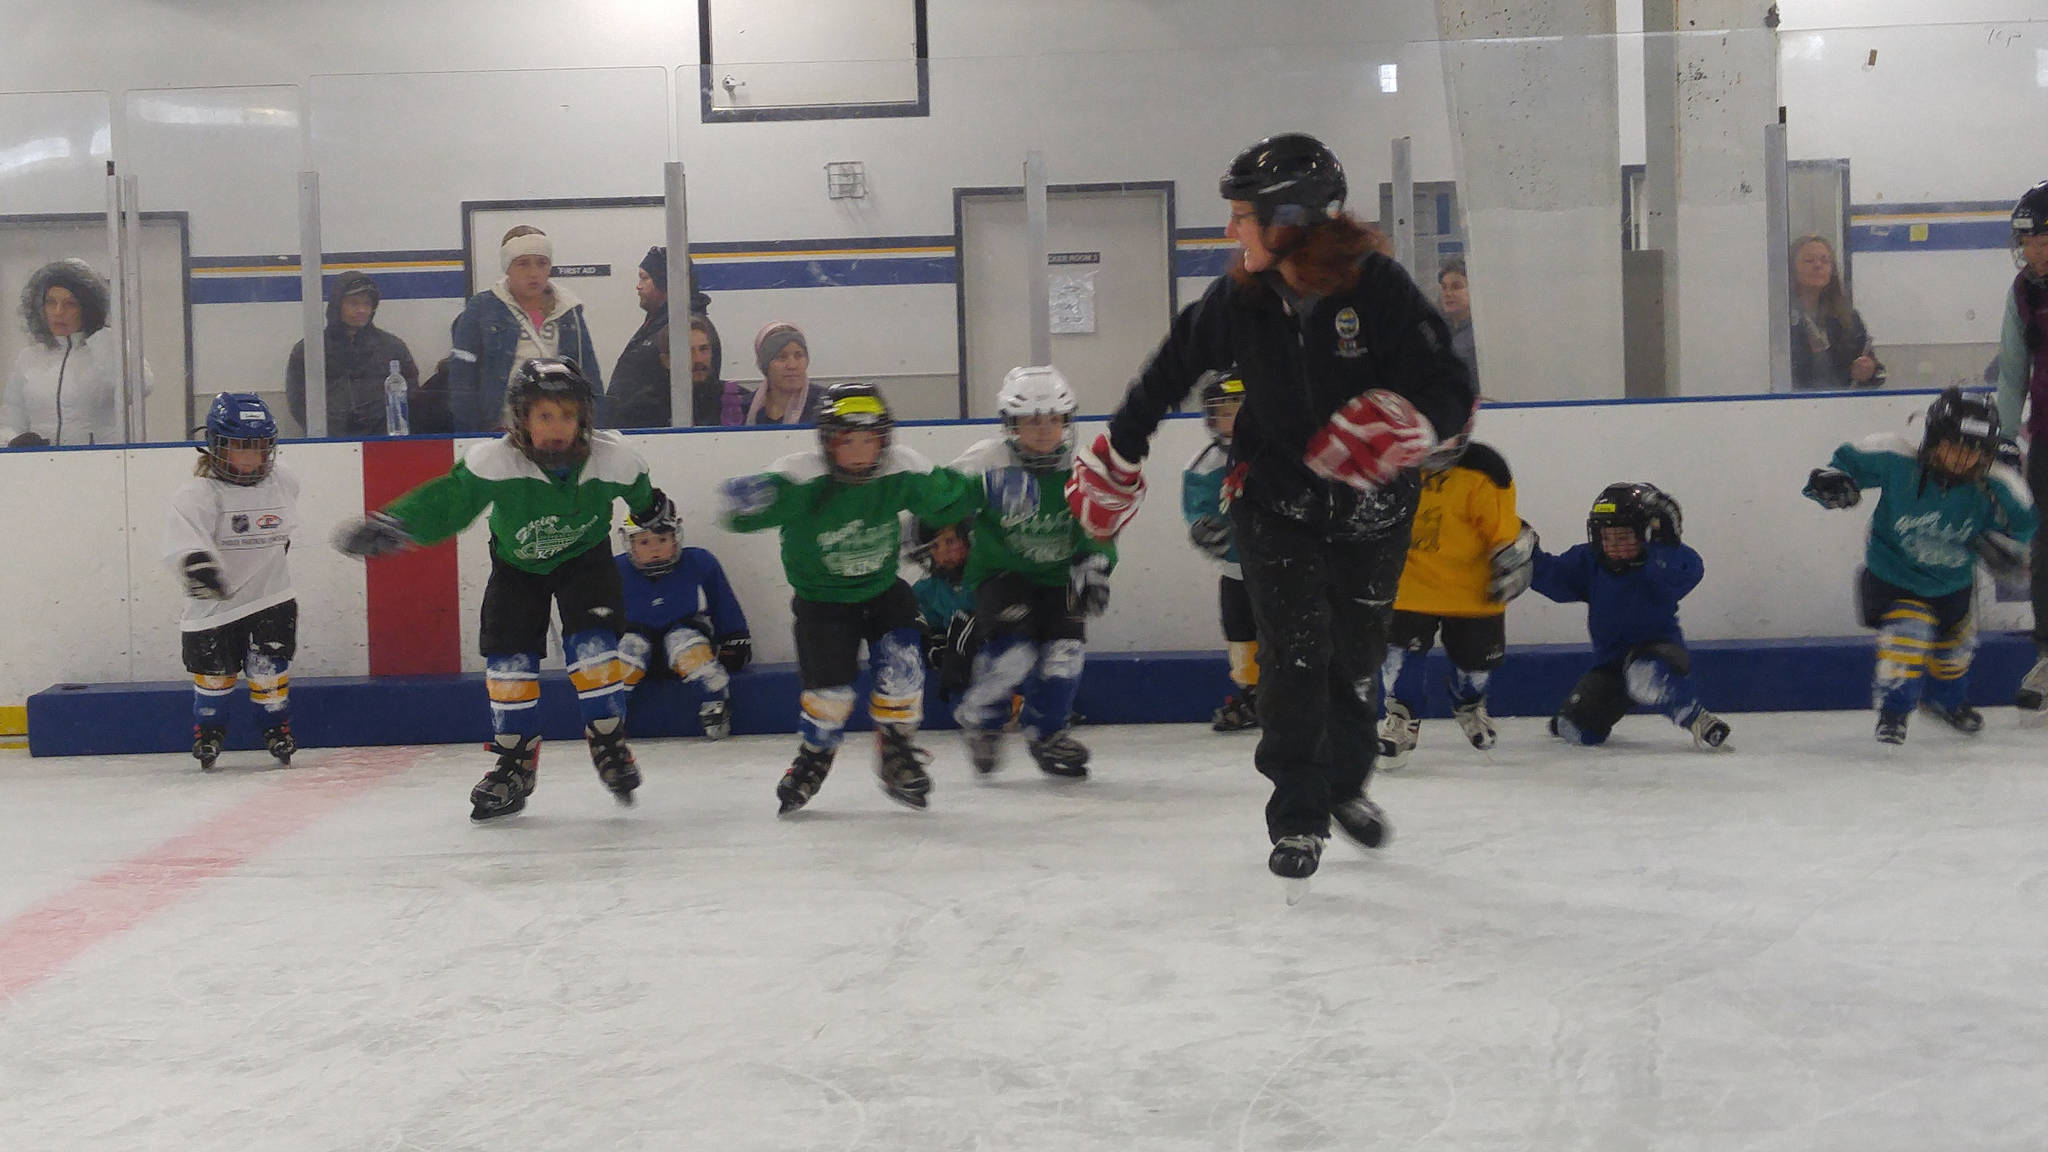 Ingrid Harrald teaches a MicroBells class at the Kevin Bell Ice Arena. Free to new skaters, the 1-hour class is for ages 4-6. (Photo provided)